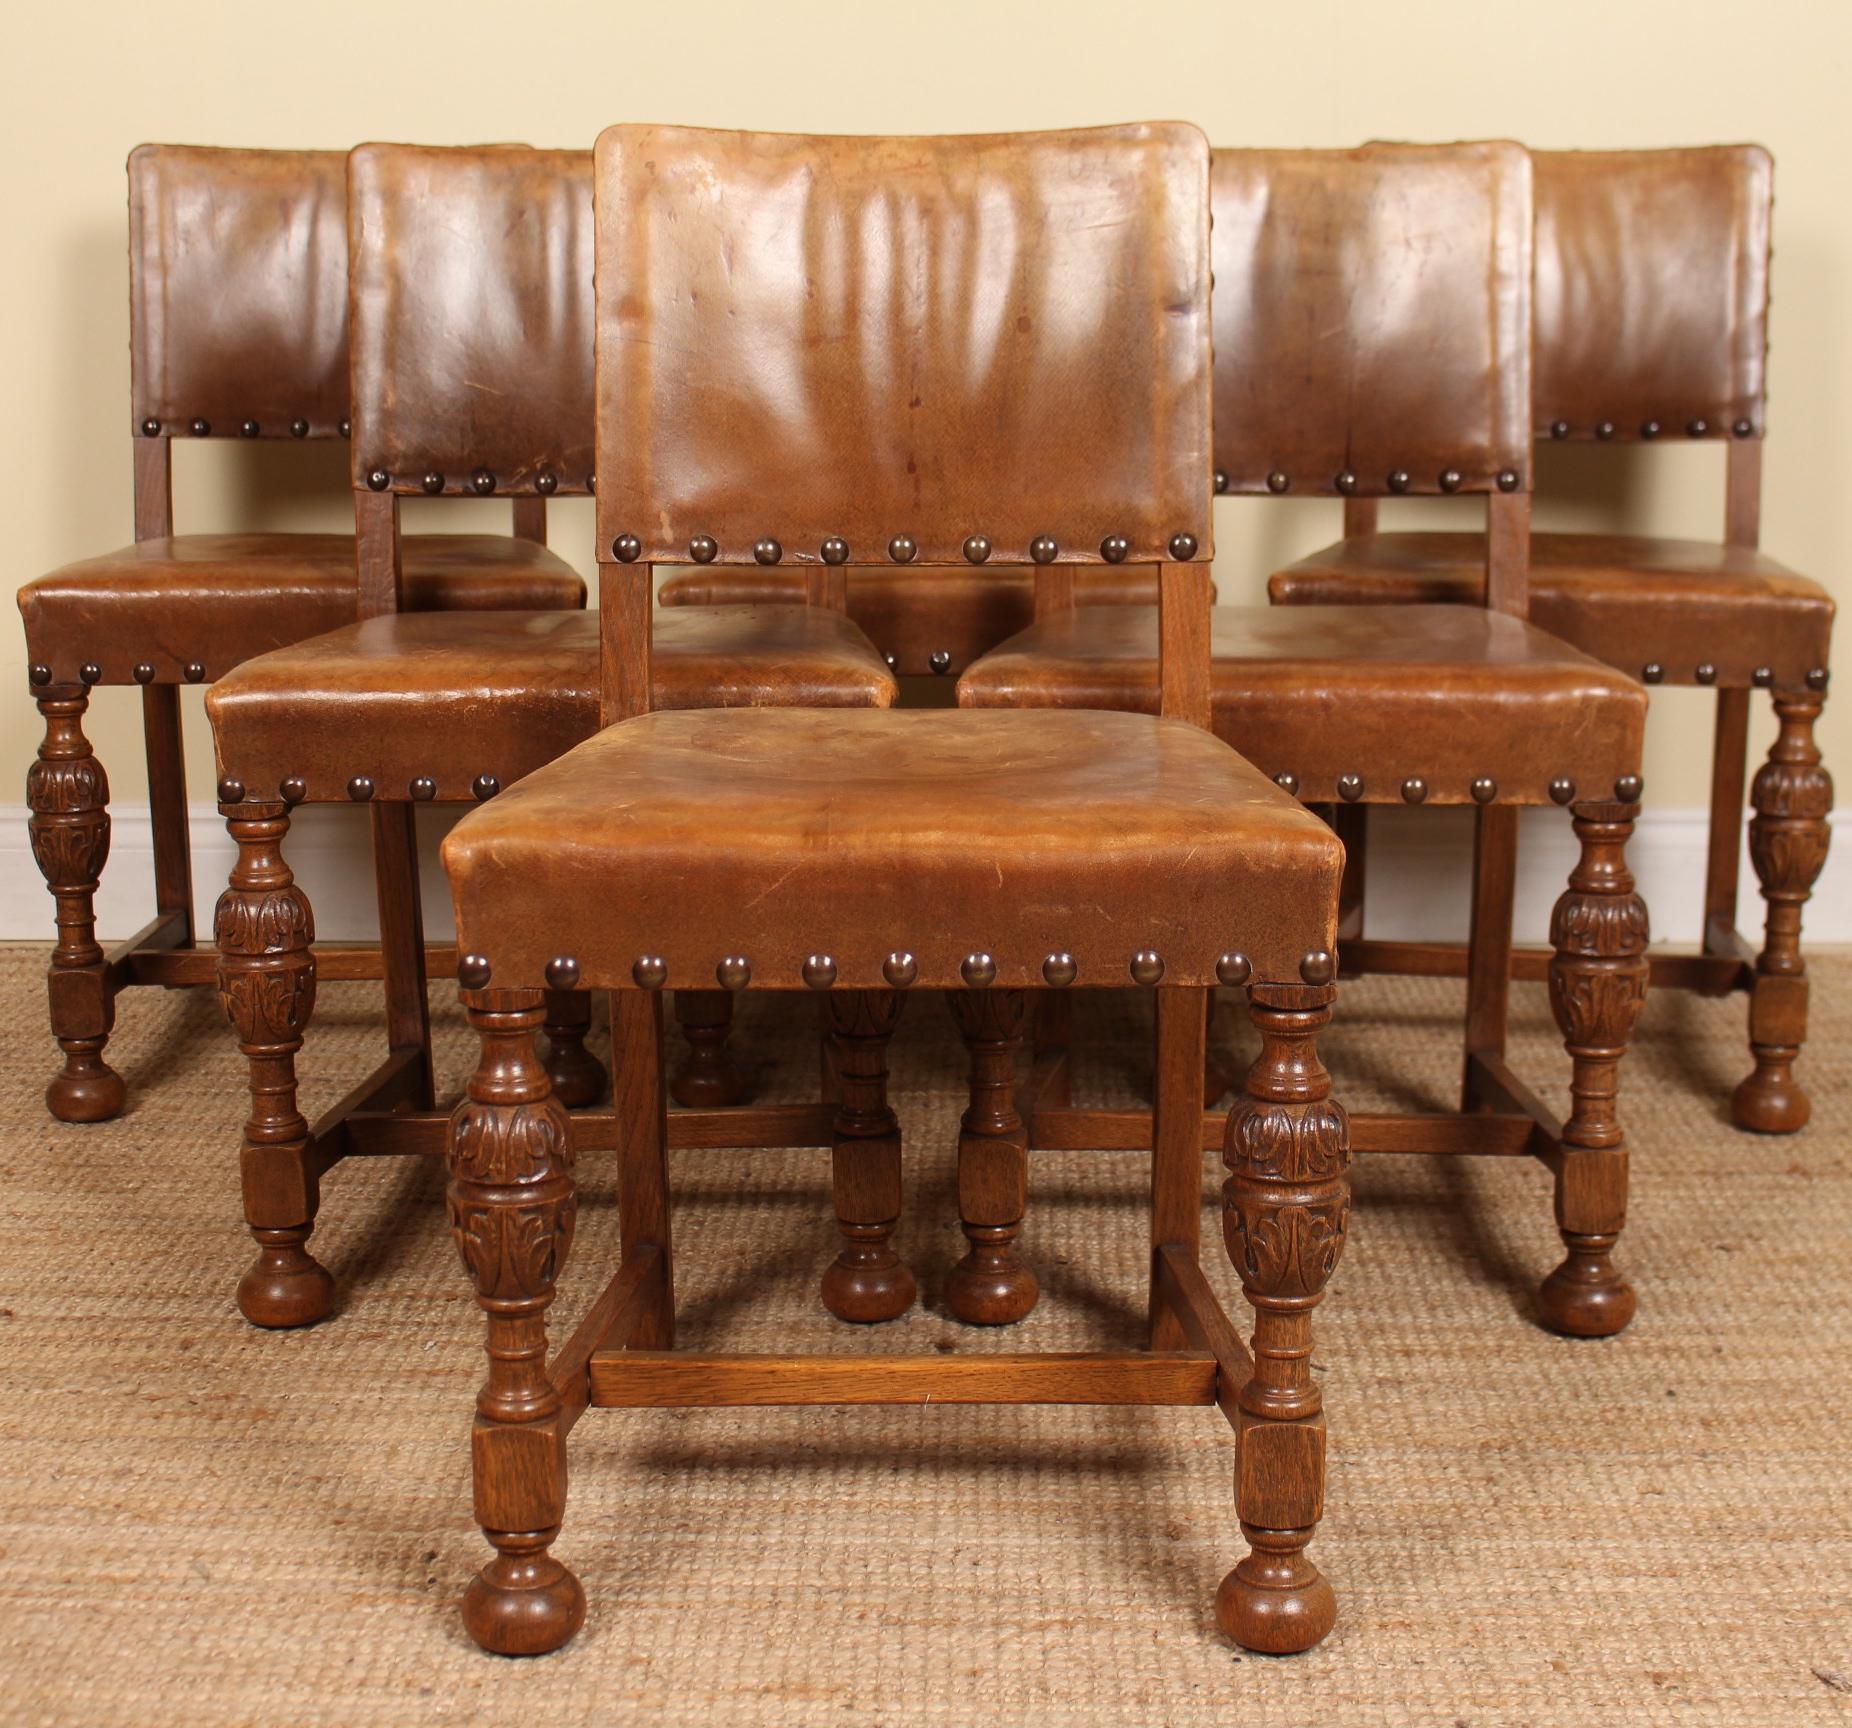 A fine quality early 20th century seven piece oak dining suite.
Constructed from thick cuts of fine solid oak boasting a well figured wild honey tone grain.

The dining chairs upholstered in genuine tan leather with studded borders and raised on